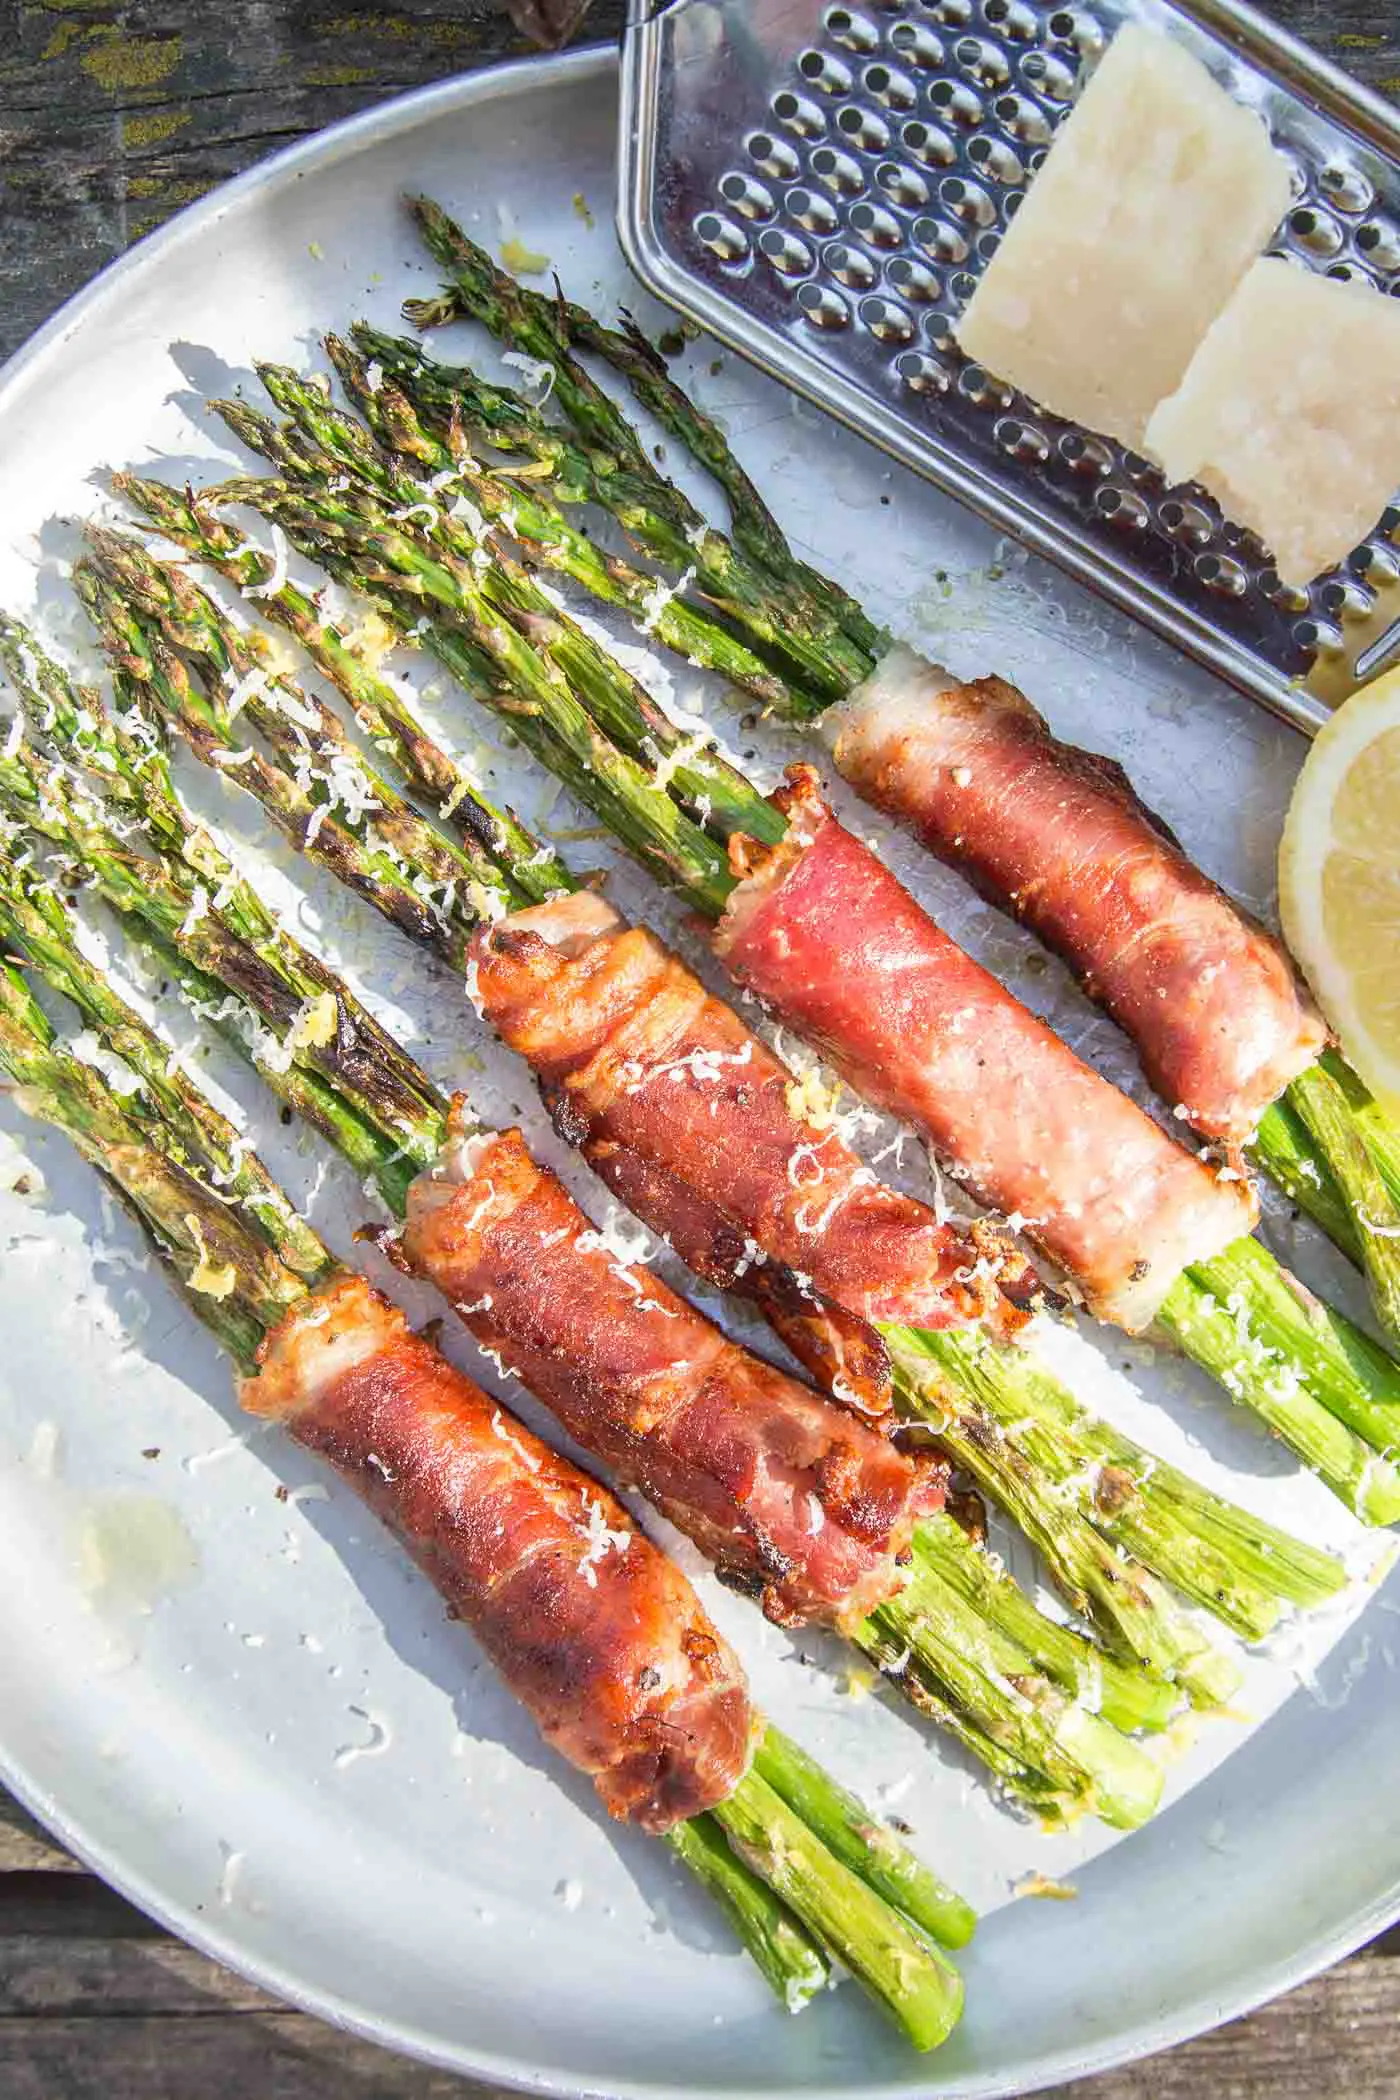 Five prosciutto wrapped asparagus bundles on a plate